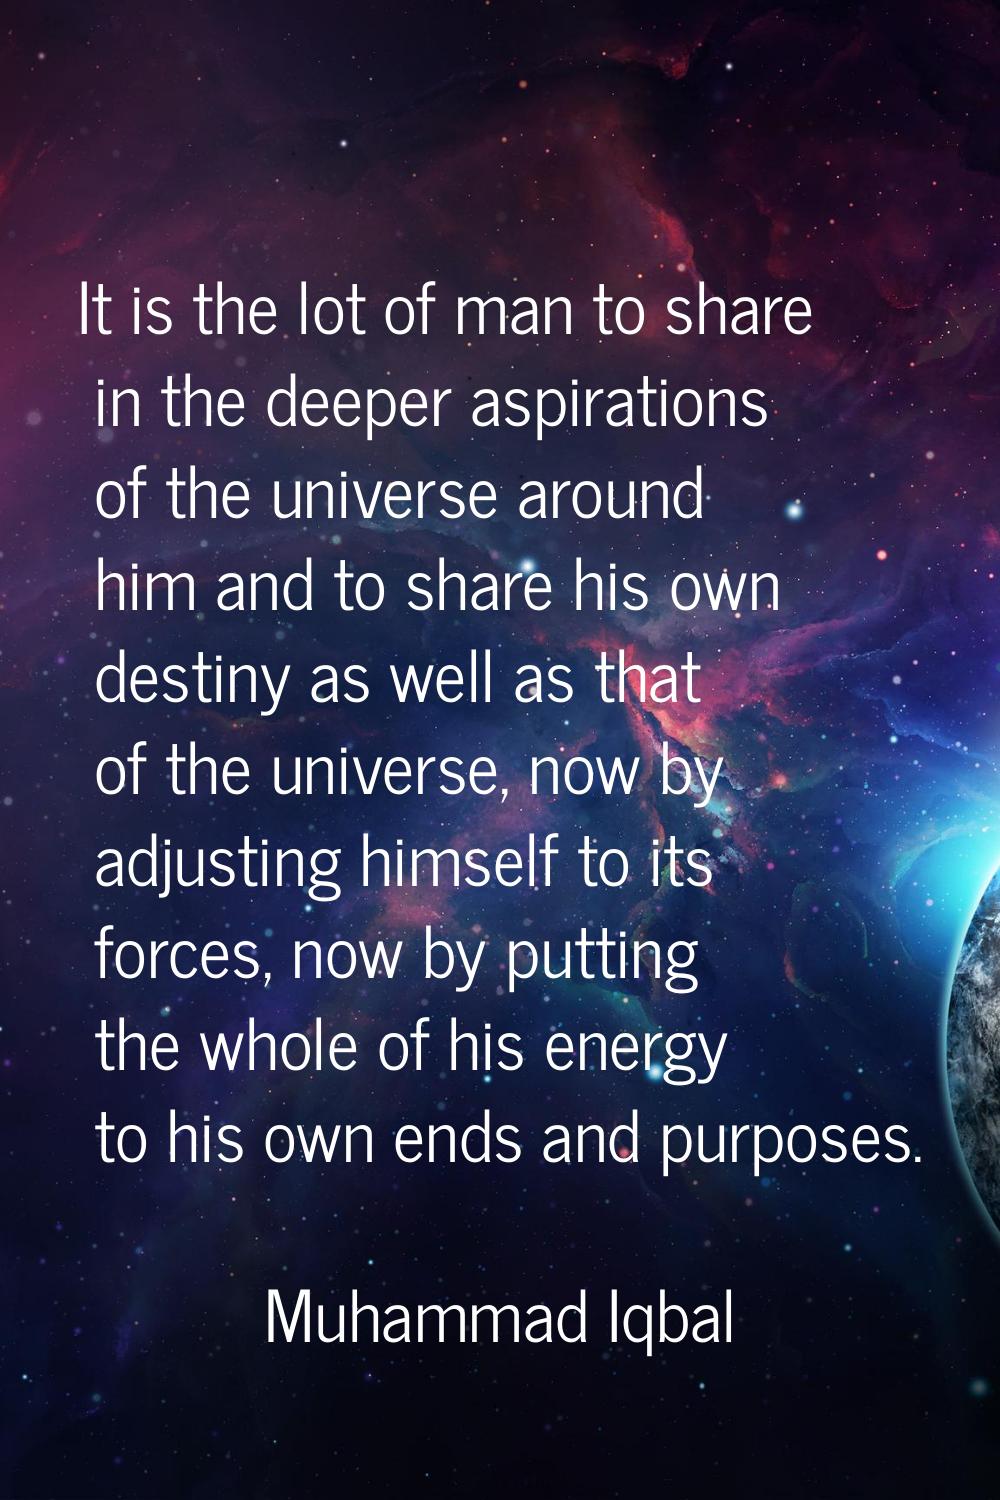 It is the lot of man to share in the deeper aspirations of the universe around him and to share his